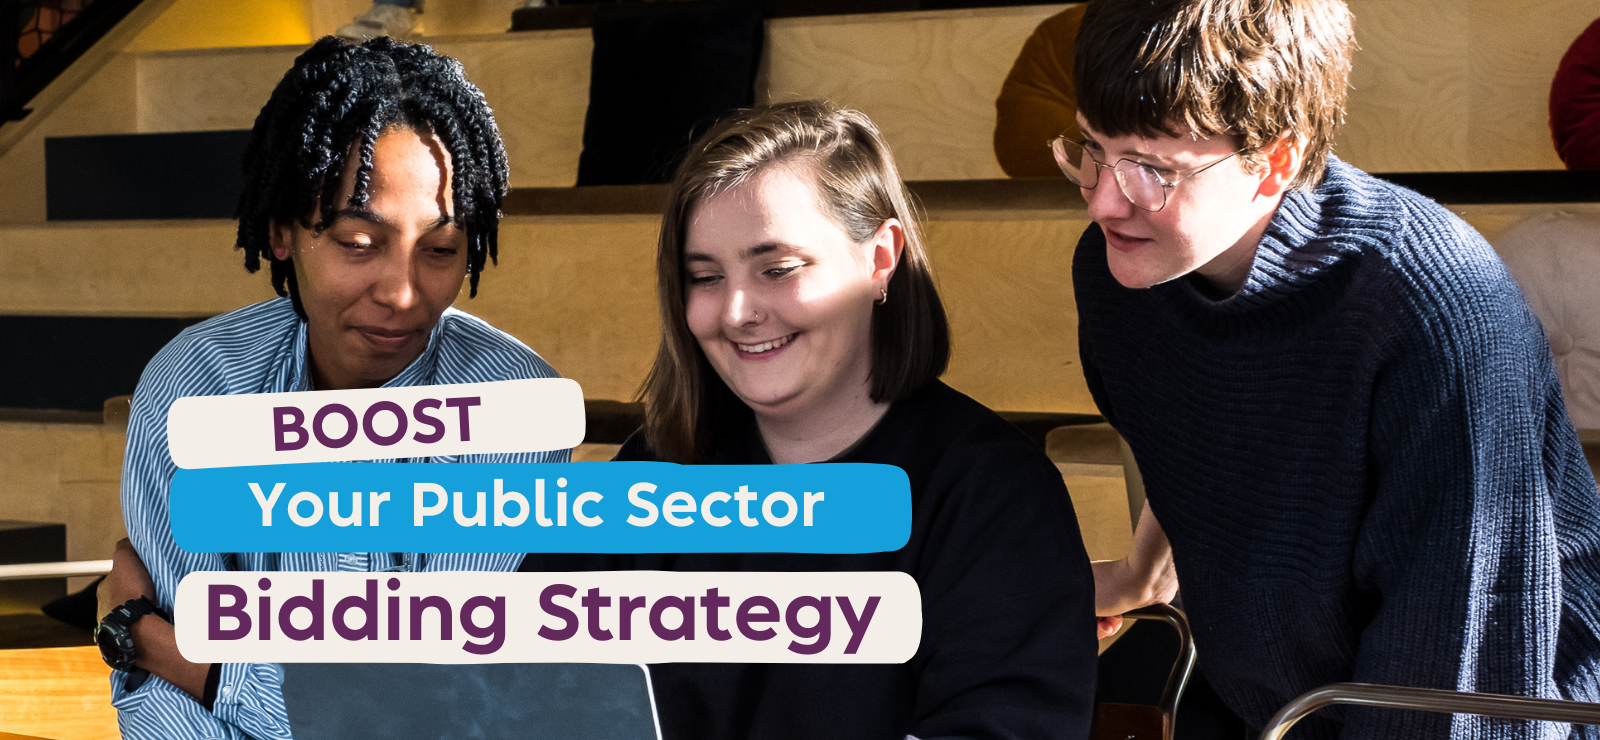 Boost Your Public Sector Bidding Strategy Blog Post 1600 x 740 px aspect ratio 1600 740